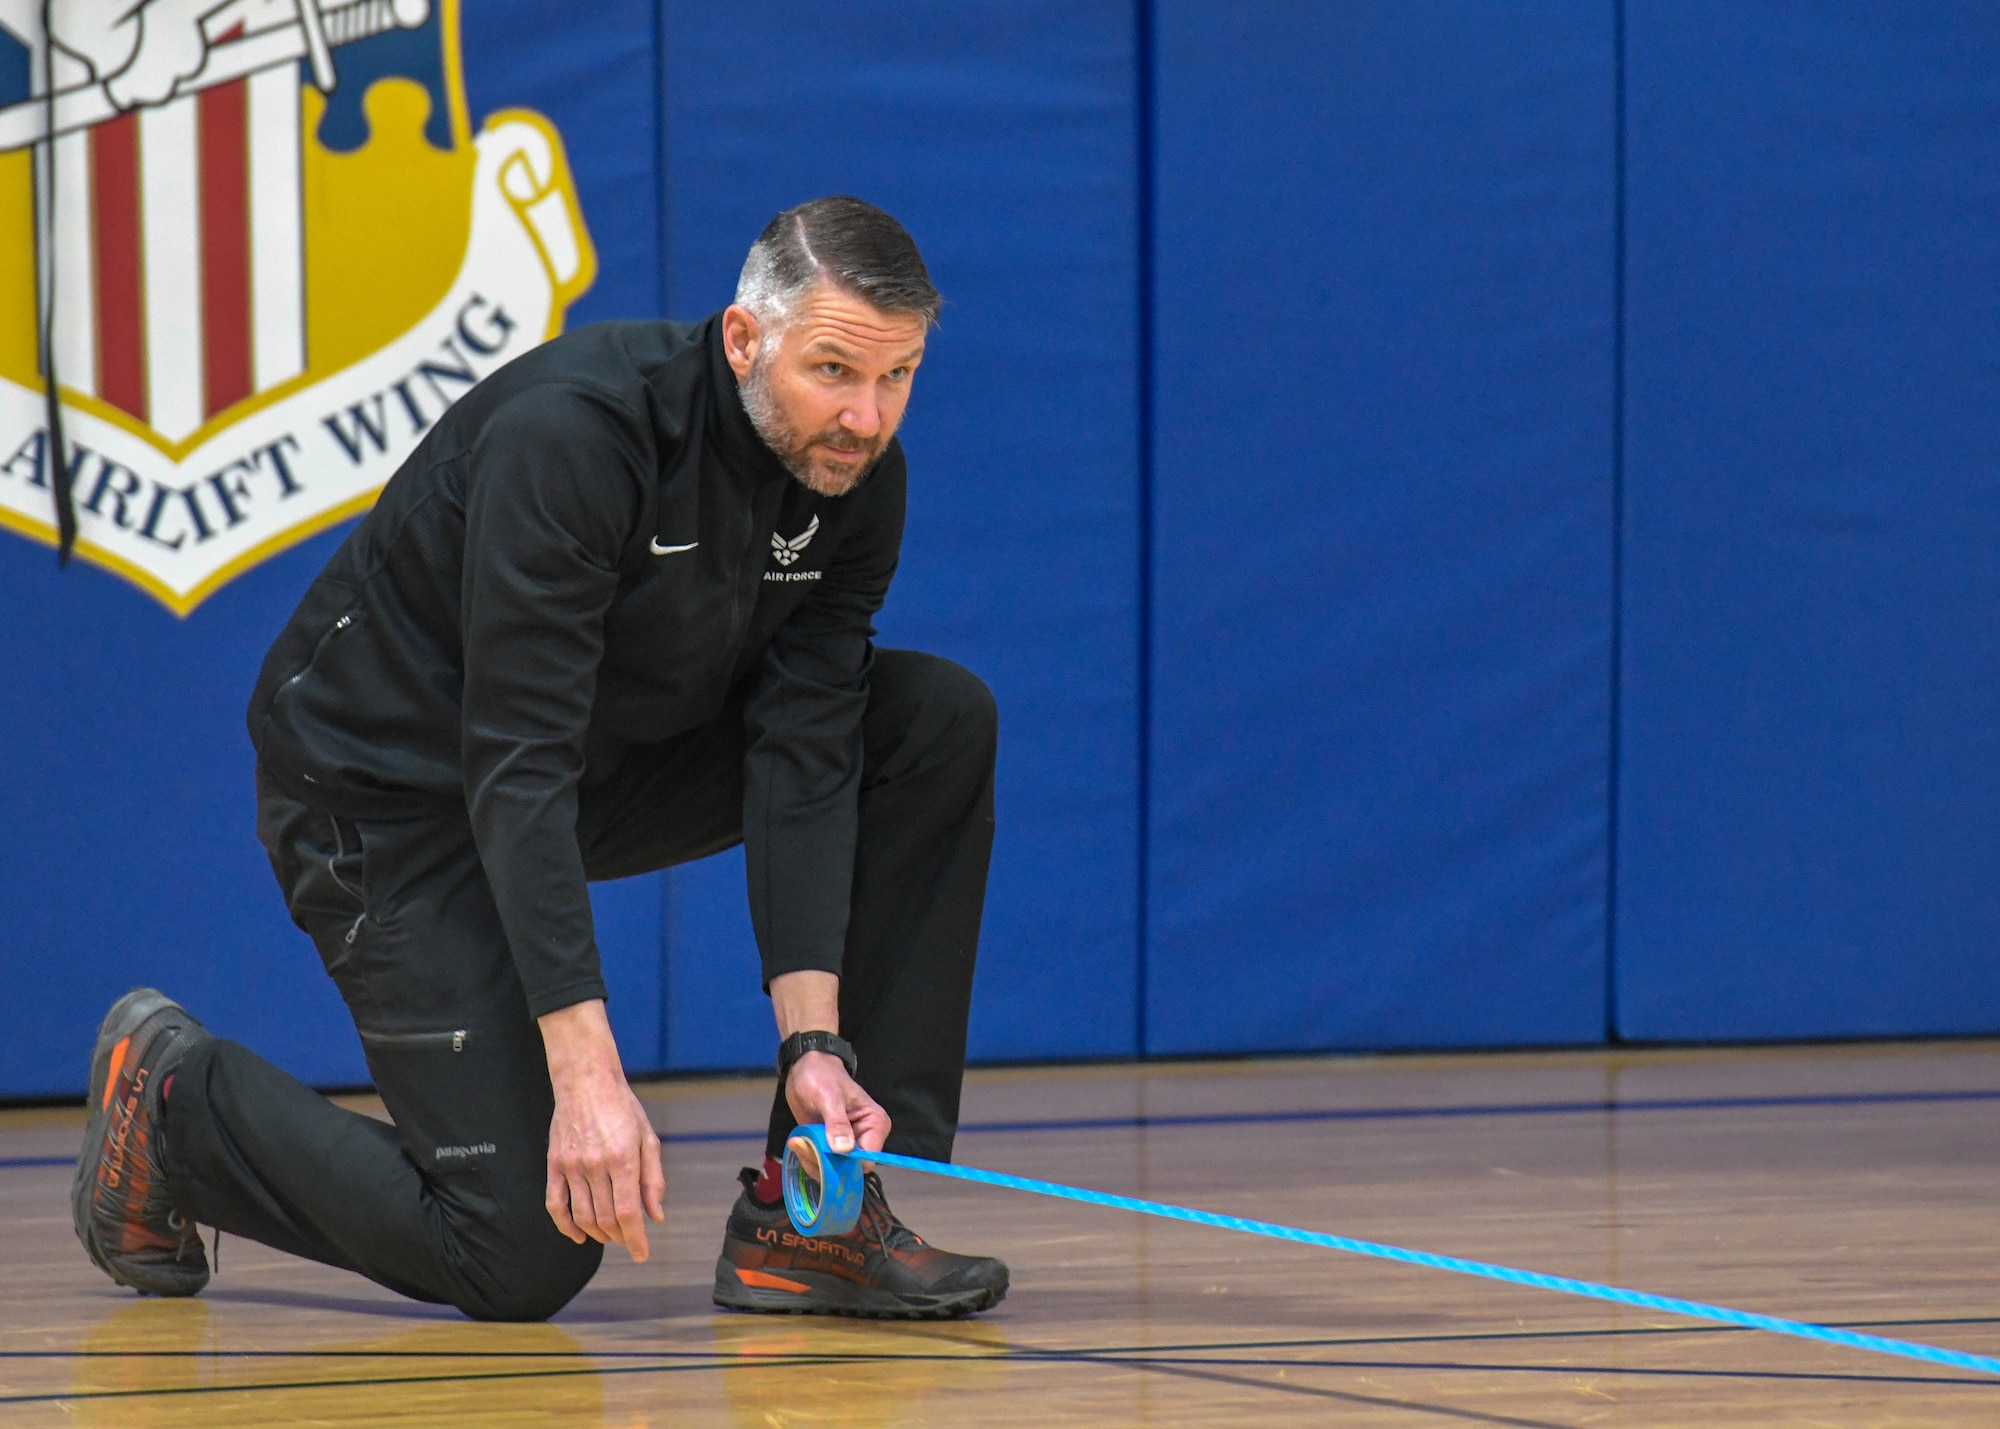 Matthew Gruse, exercise physiologist for the 910th Airlift Wing, puts tape on the gym floor marking the start line for a beep test here, April 18, 2019.